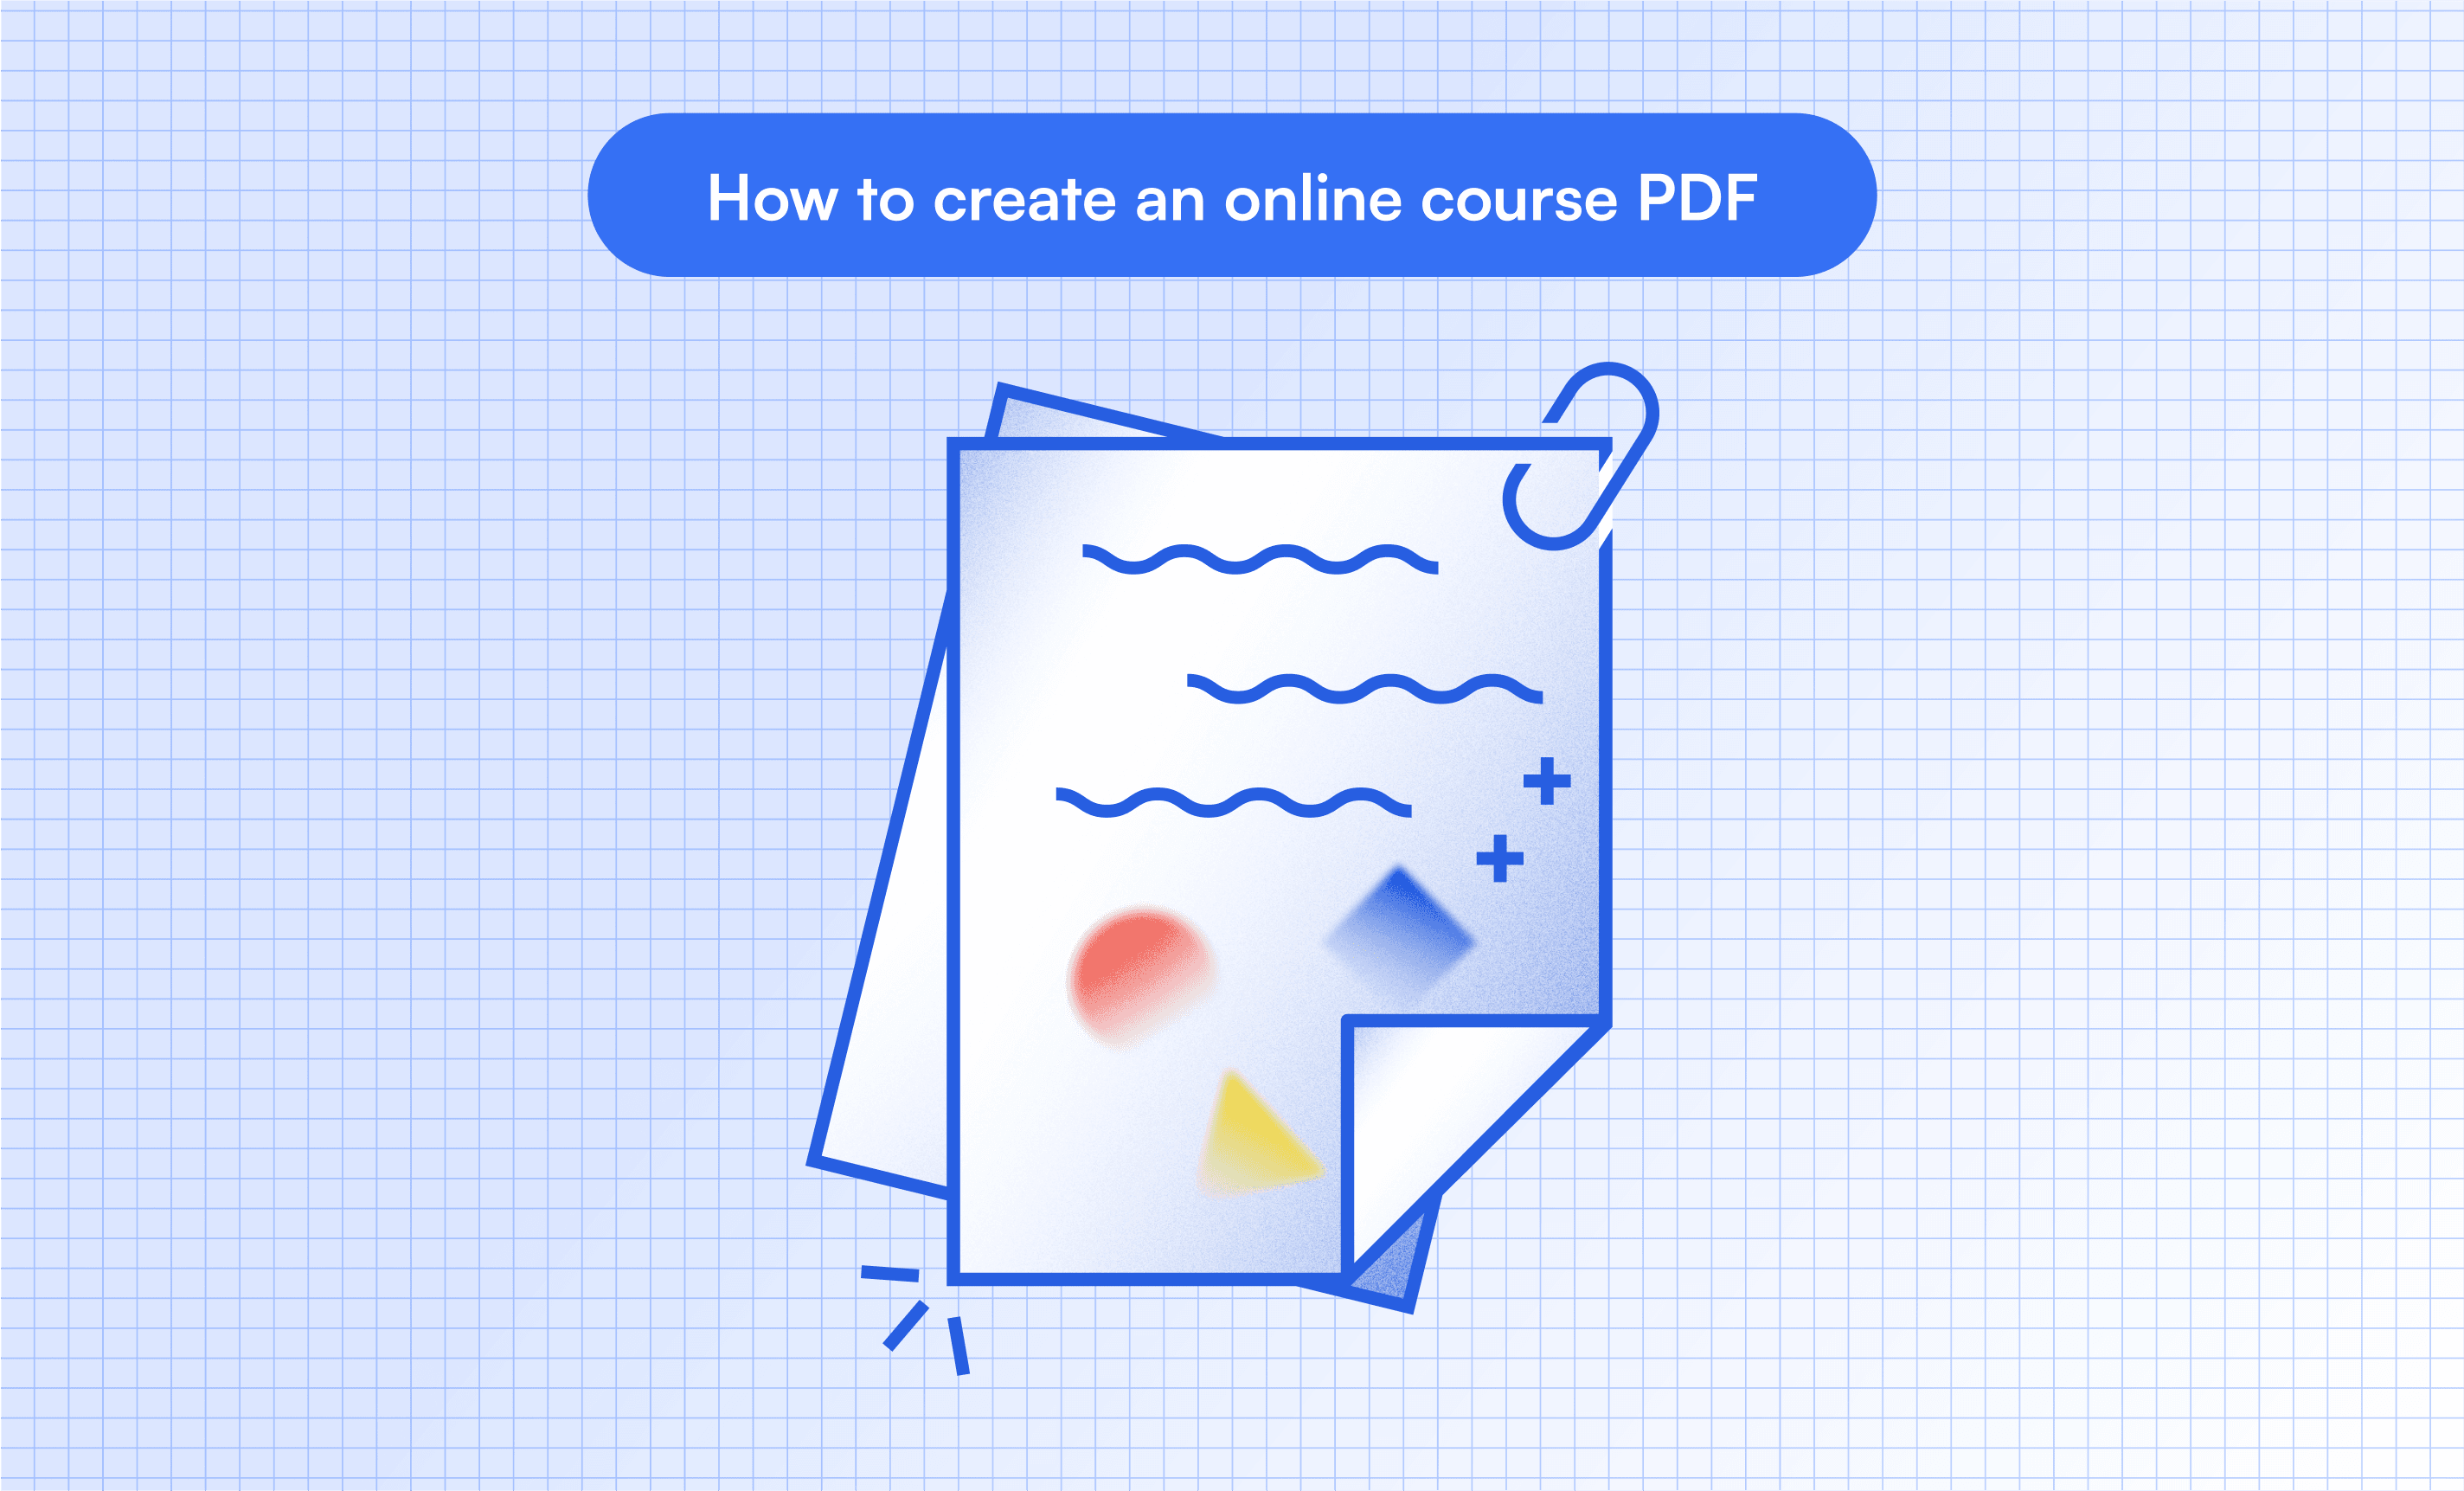 How to create an online course PDF